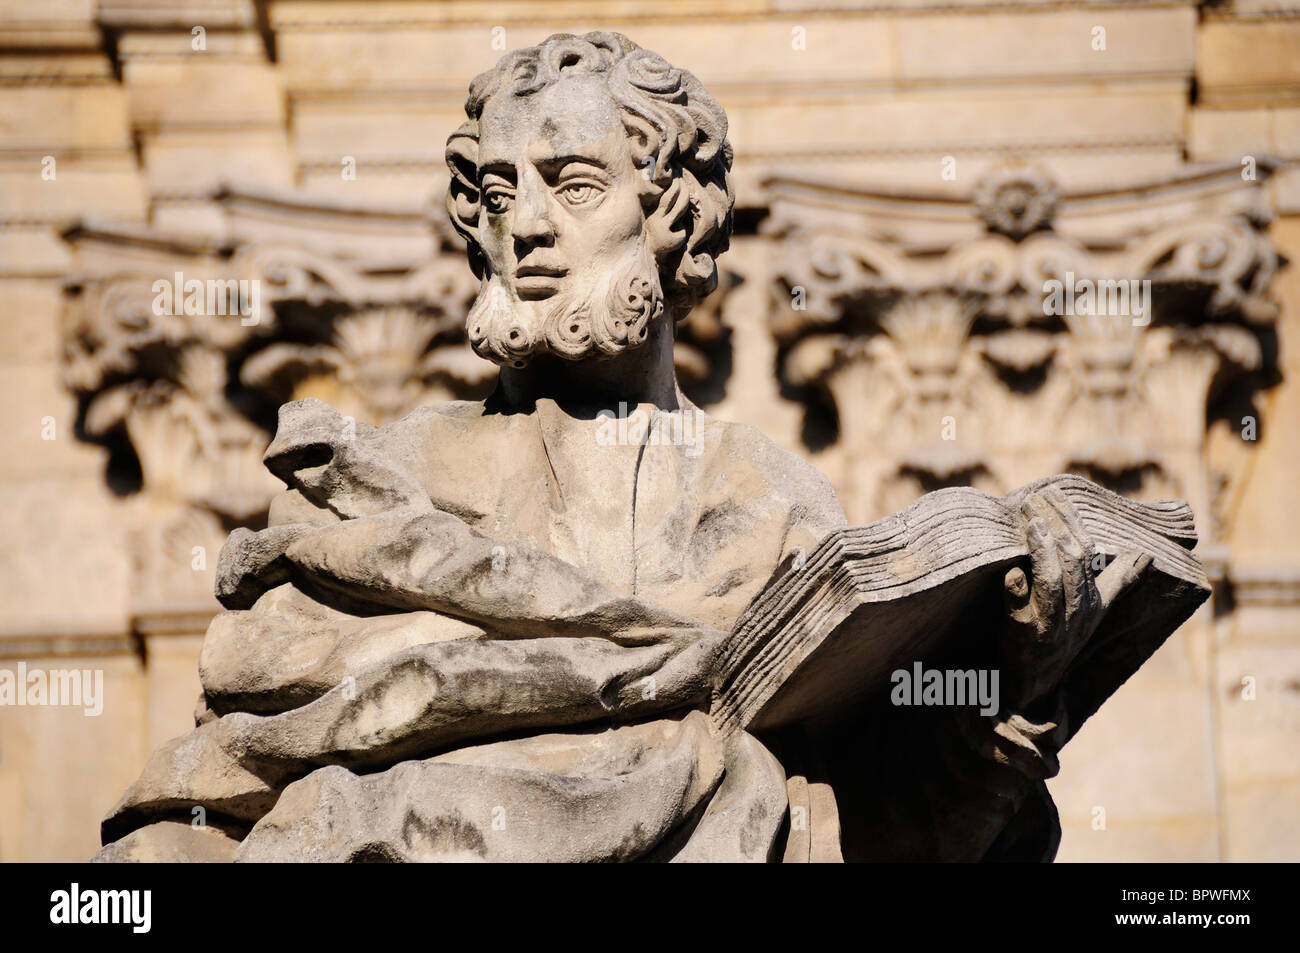 Apostle statue at St Peter & Paul Church in Krakow Stock Photo